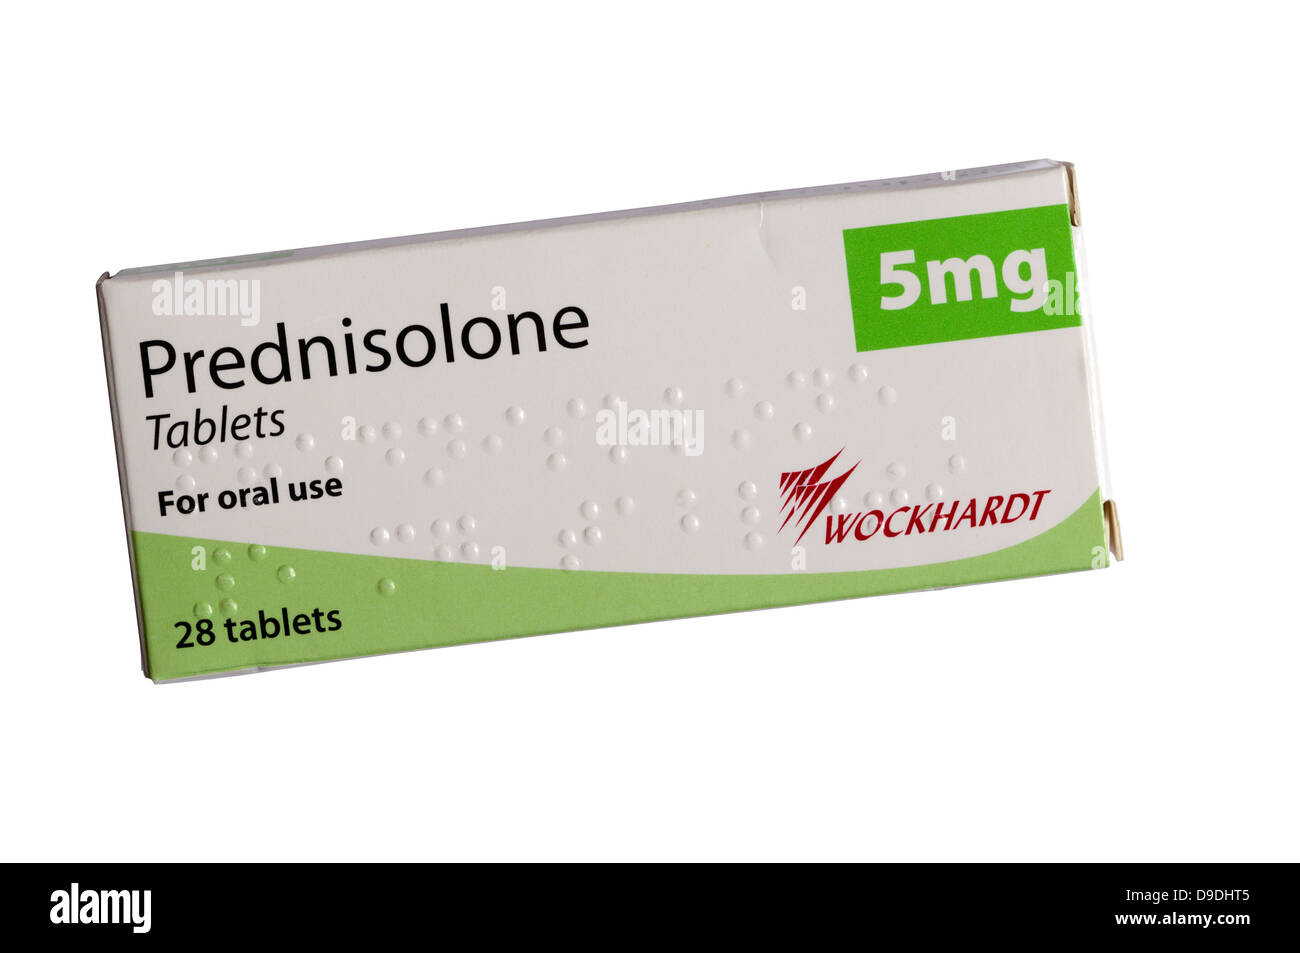 A stock photograph of a packet of Prednisolone tablets, used to treat inflammatory or auto-immune conditions including asthma & rheumatoid arthritis. Stock Photo